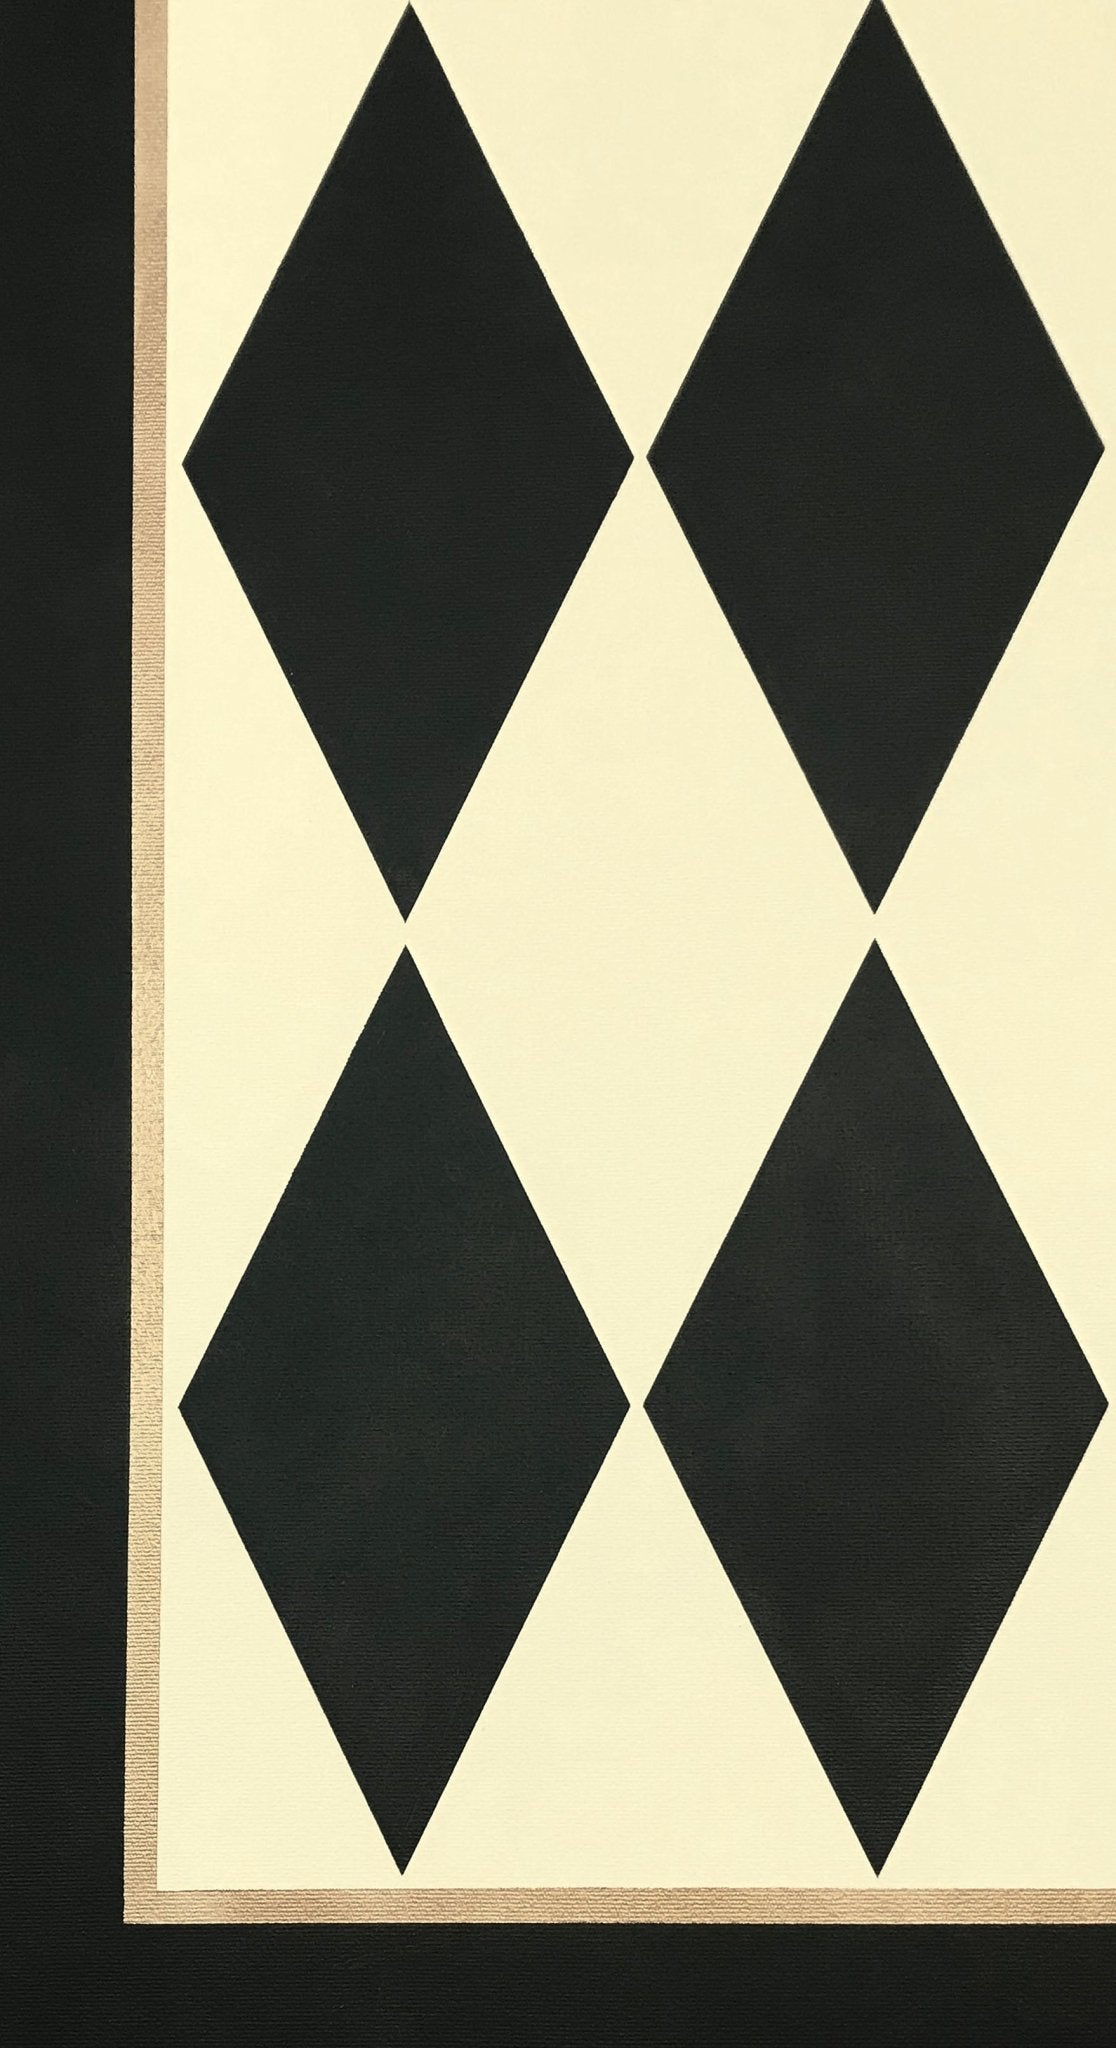 A close up image of this harlequin patterned floorcloth in a soft yellow-white and charcoal colorway.